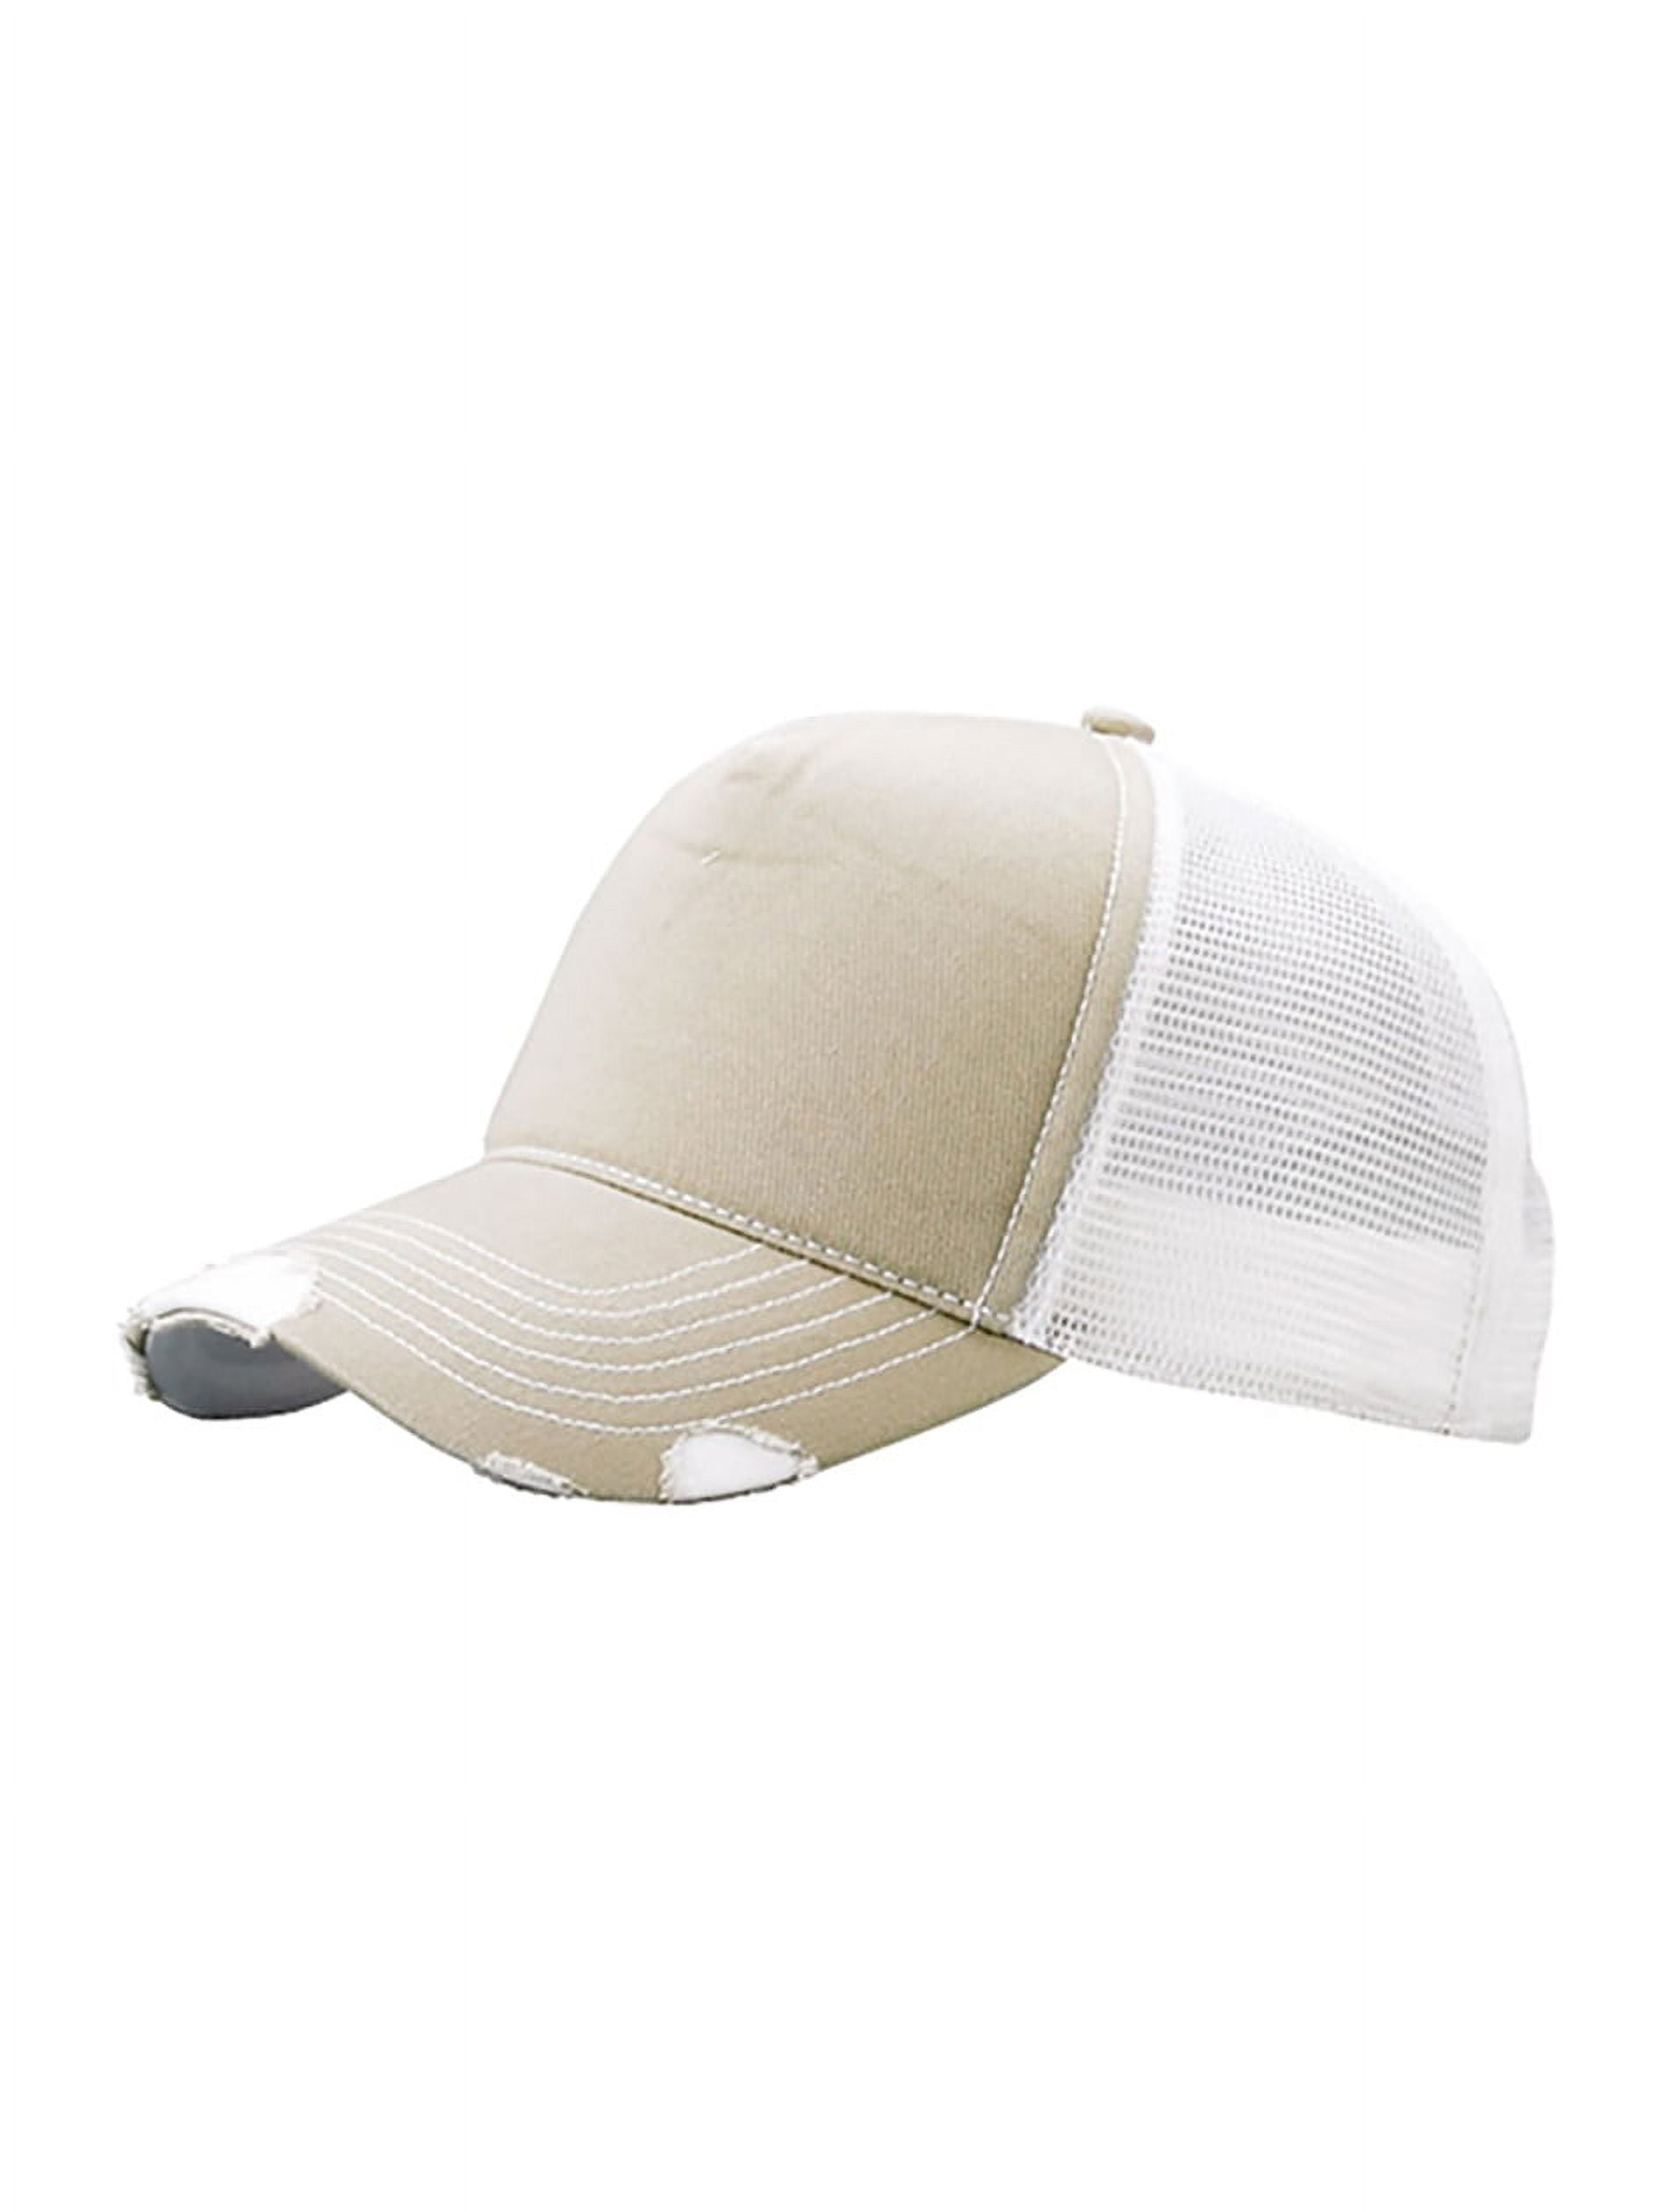 Cardani Hat Sizer Reducer Insert-Cut into Band or Strips-White at   Women's Clothing store